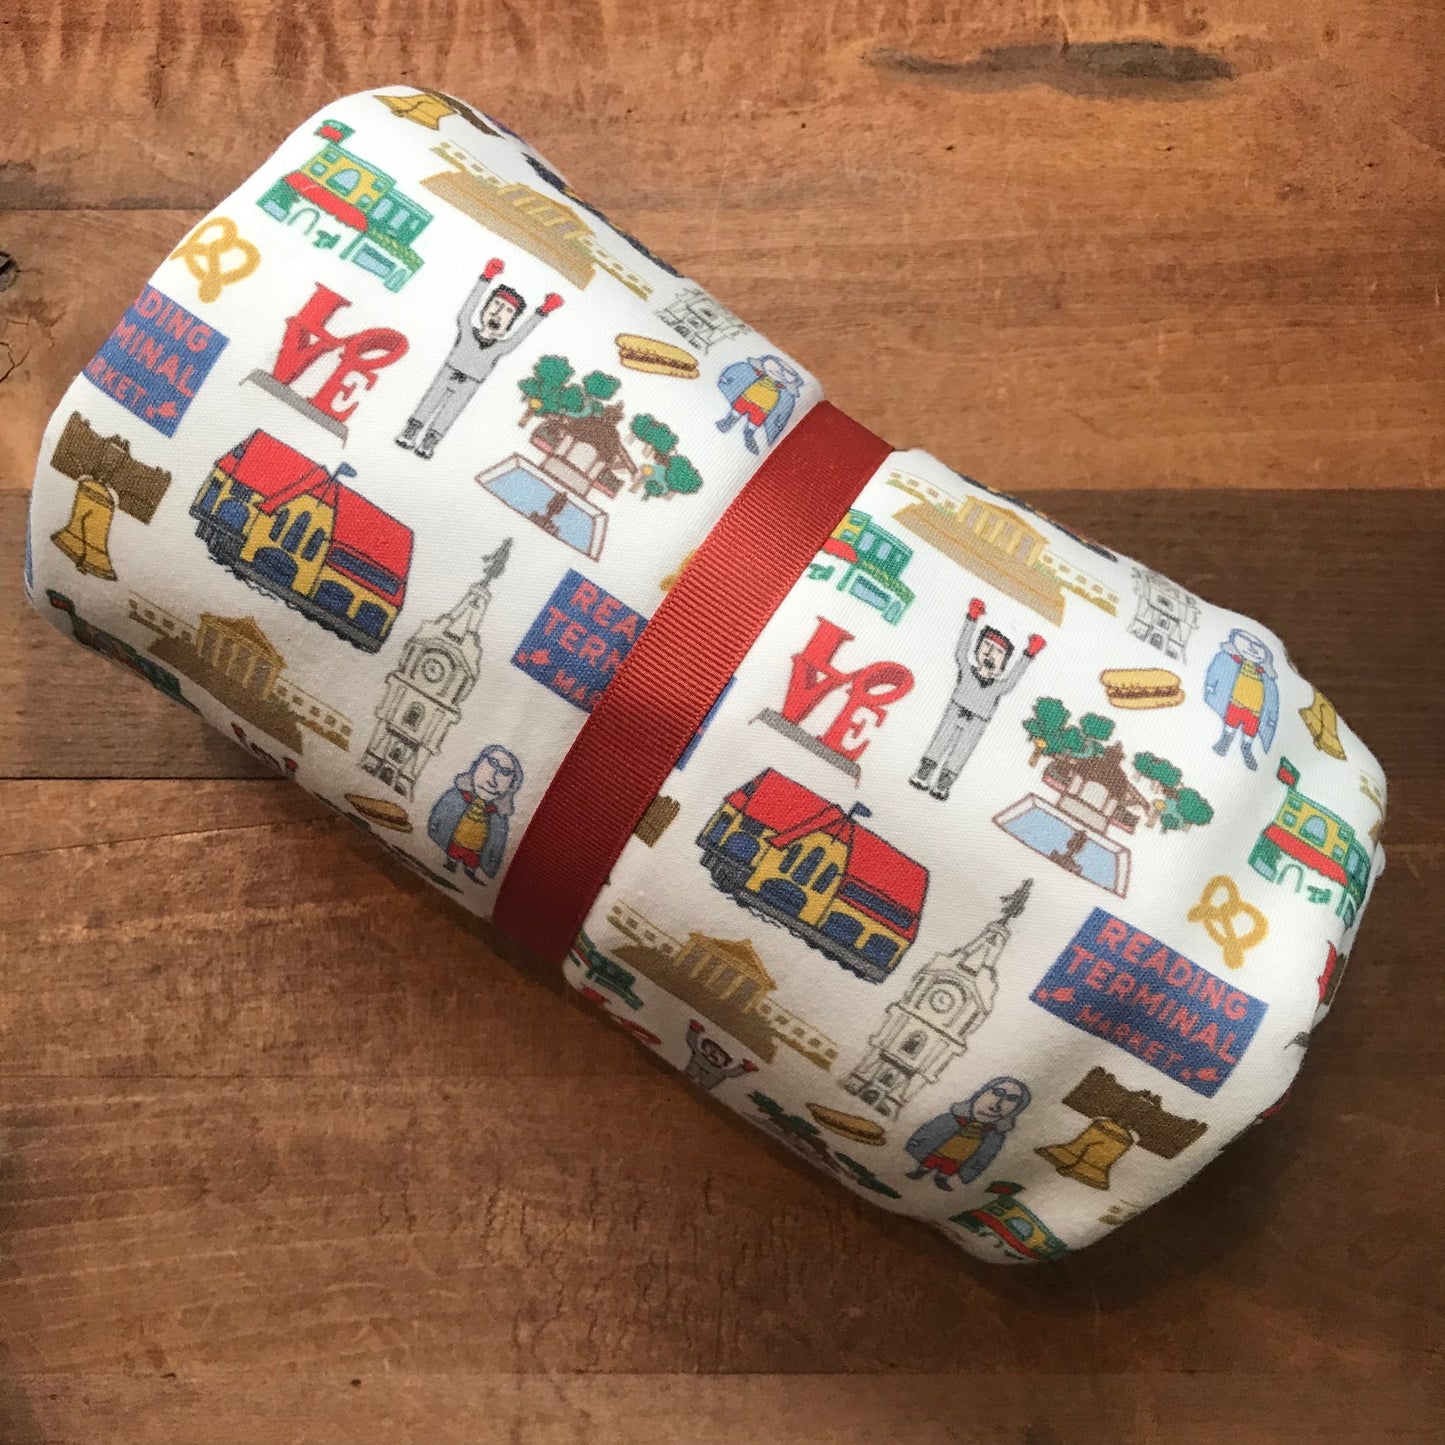 A Philly Baby Blanket by Ana Thorne with various iconic symbols and landmarks printed on its organic cotton fabric, secured with a red band, displayed on a wooden surface.